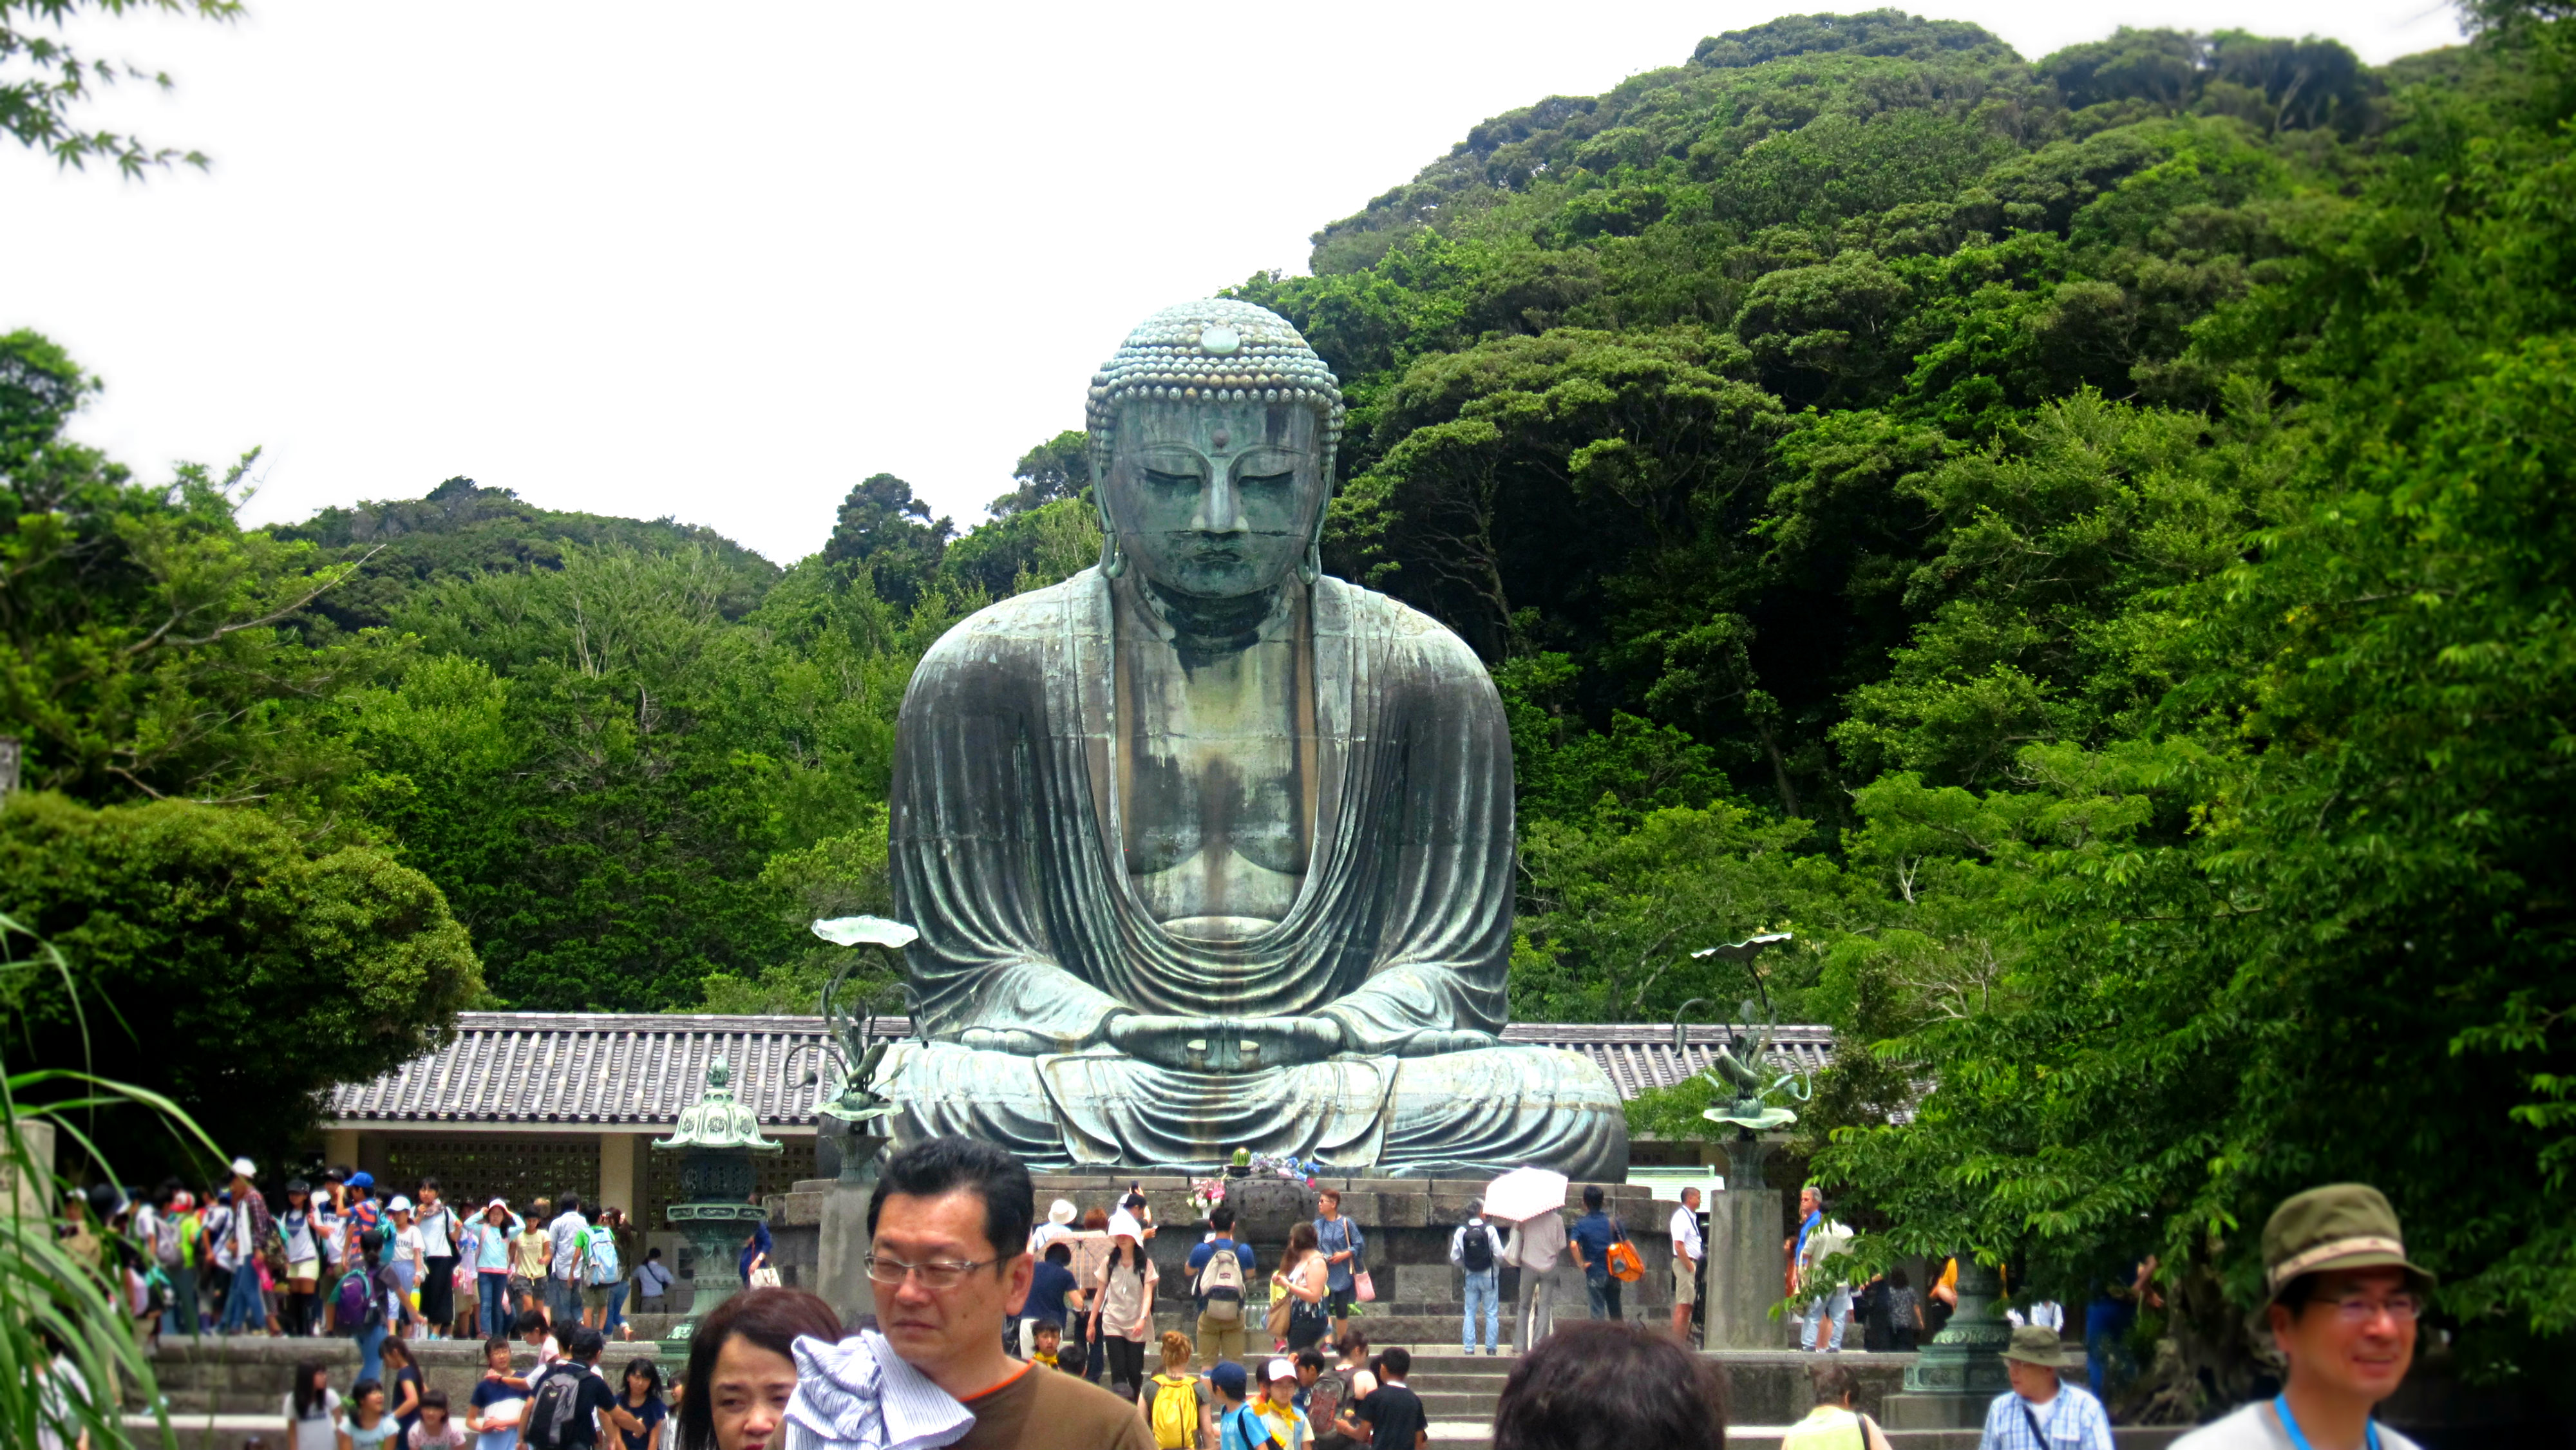 great giant buddha in japan